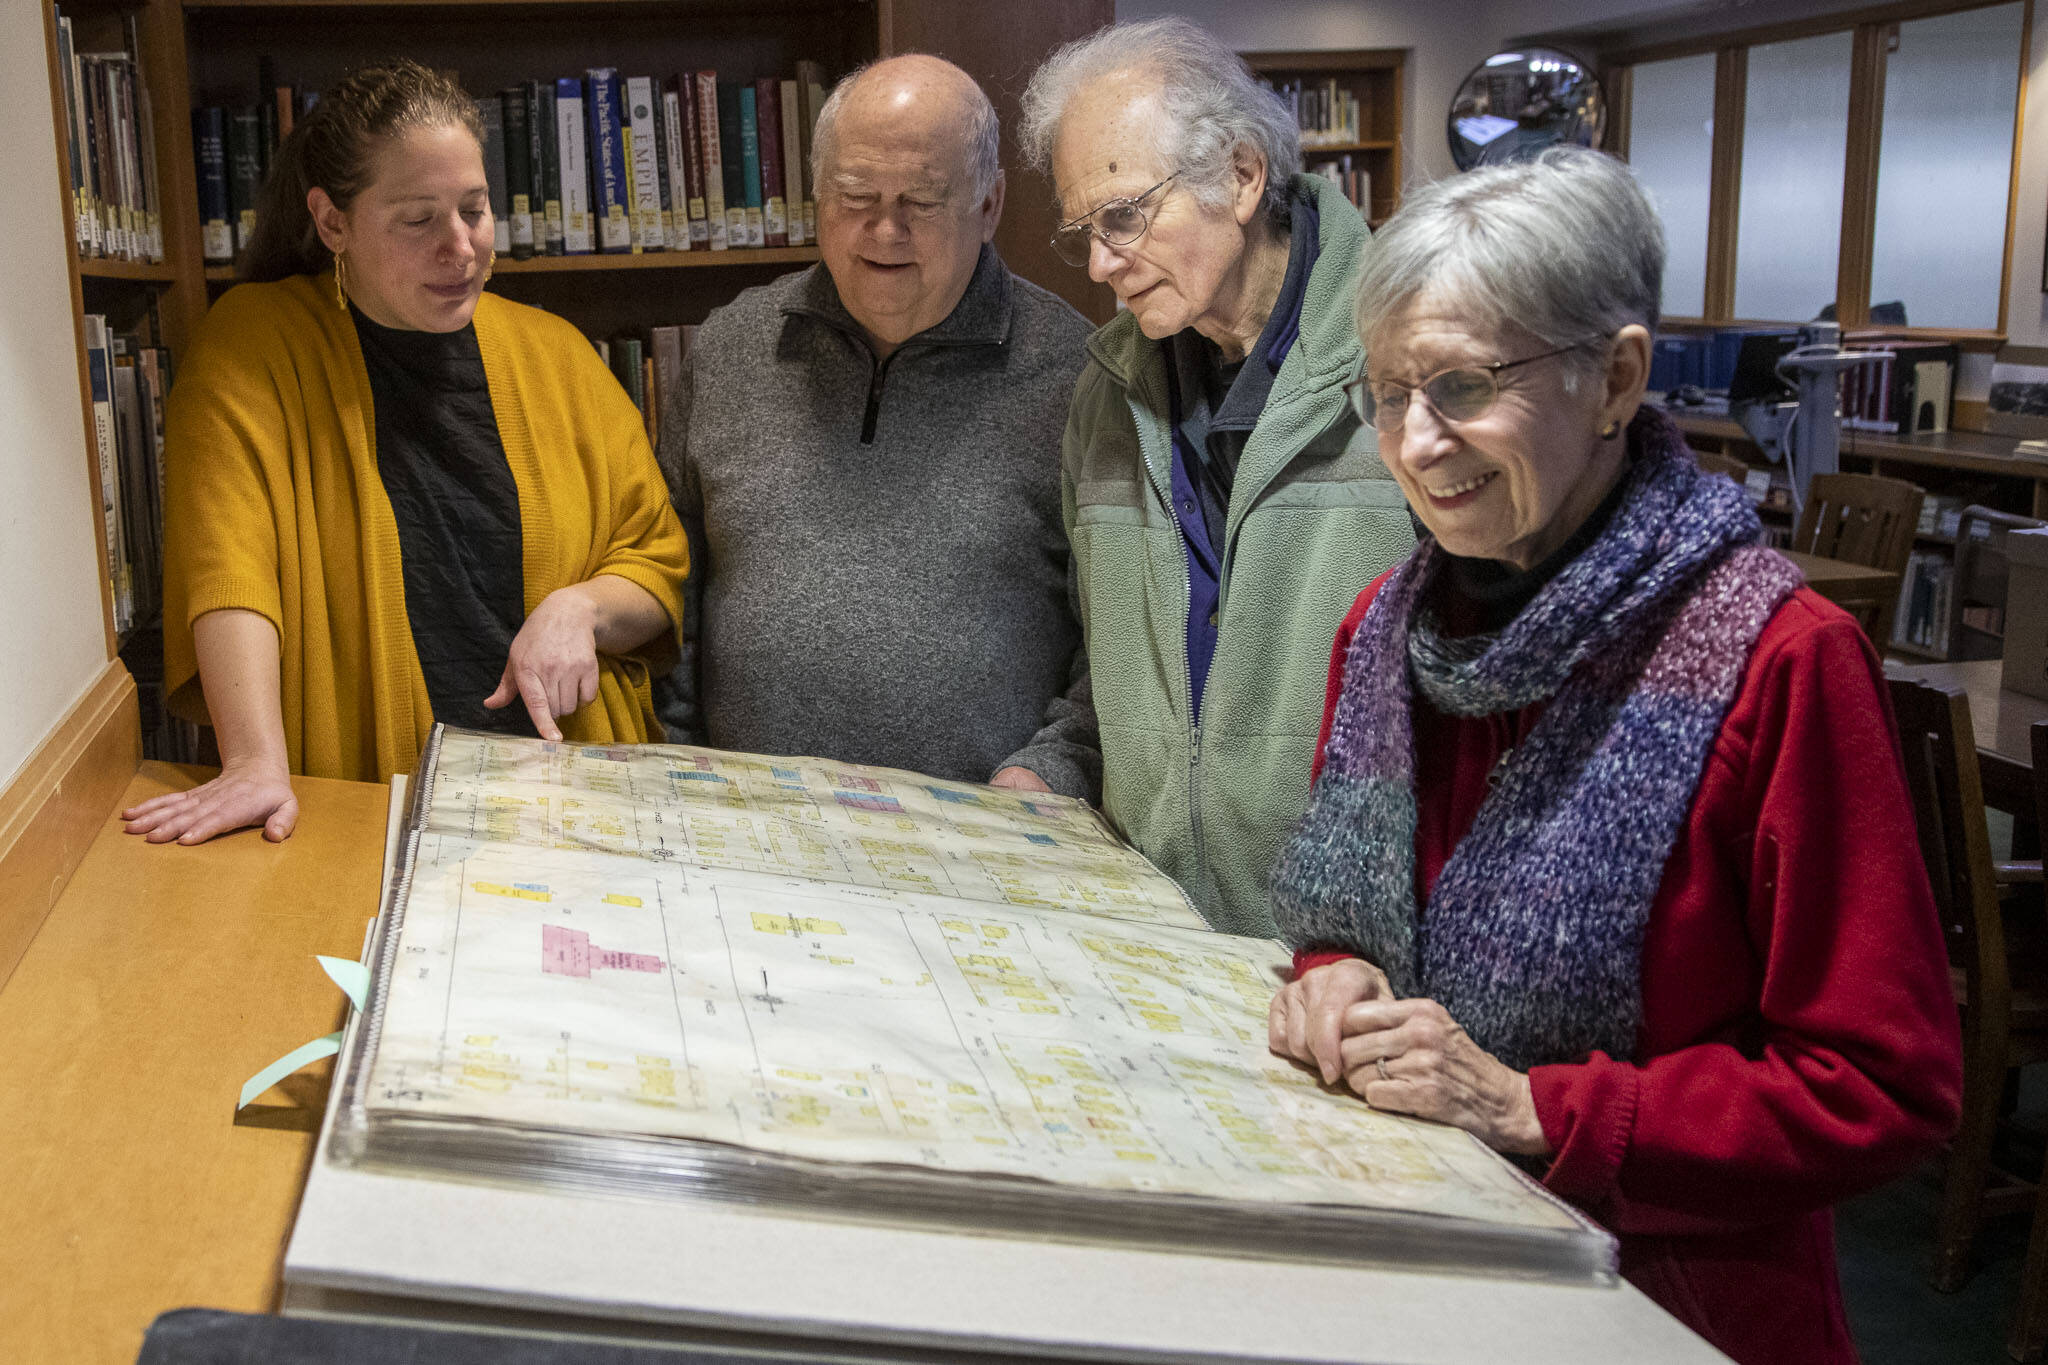 Left to right, Northwest Room Librarian Lisa Labovitch, 41, and contributors to HistoryLink, an online encyclopedia on Washington history, Bob Mayer, 76, David Cameron, 81, and Louise Lindgren, 79, pose for a photo on Jan. 19, at the Everett Public Library. (Annie Barker / The Herald)